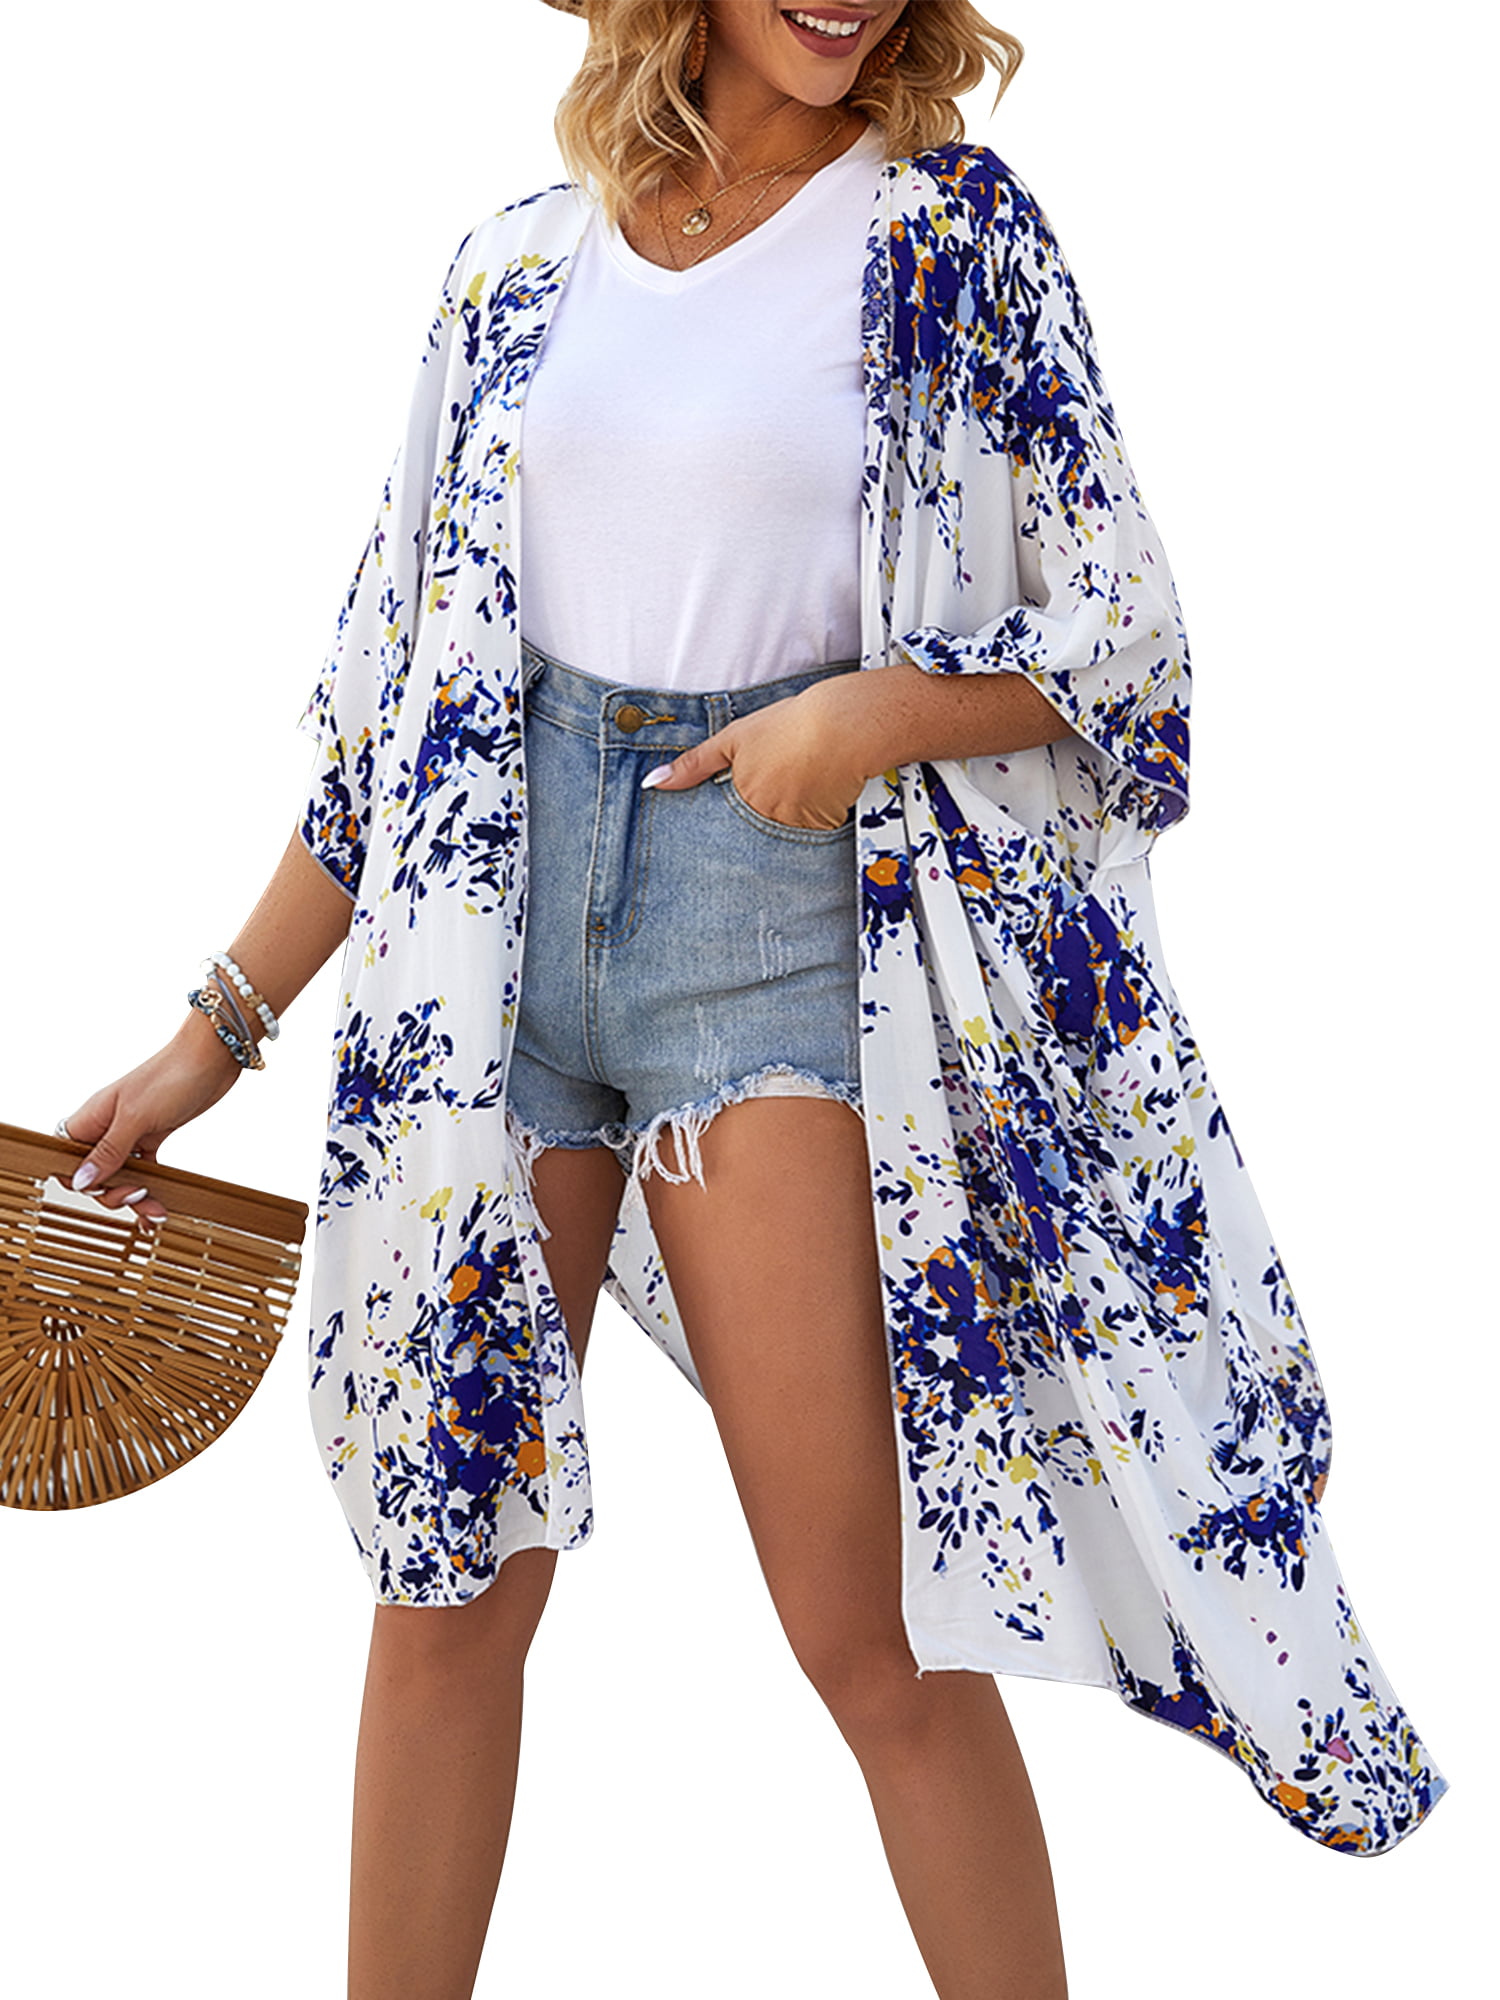 Kimono Cover Up Dress Chiffon Cover Blouse Custom Pattern Swimsuit Cover Up 